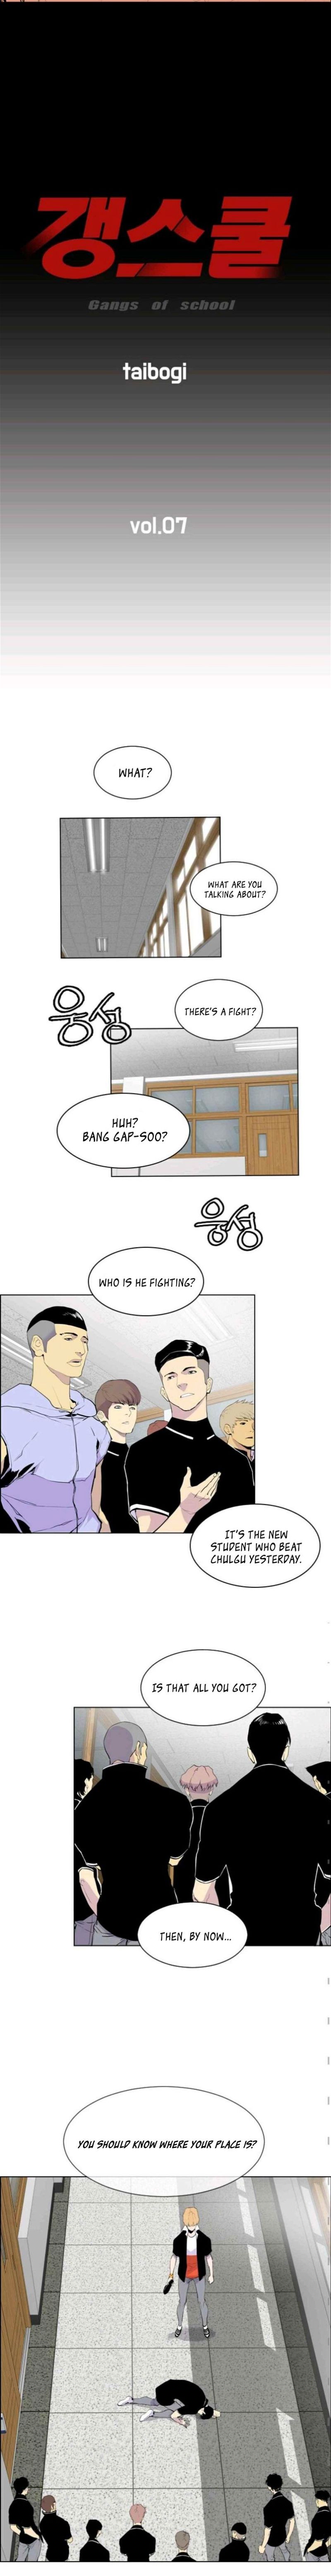 Gang of school Chapter 7 page 2